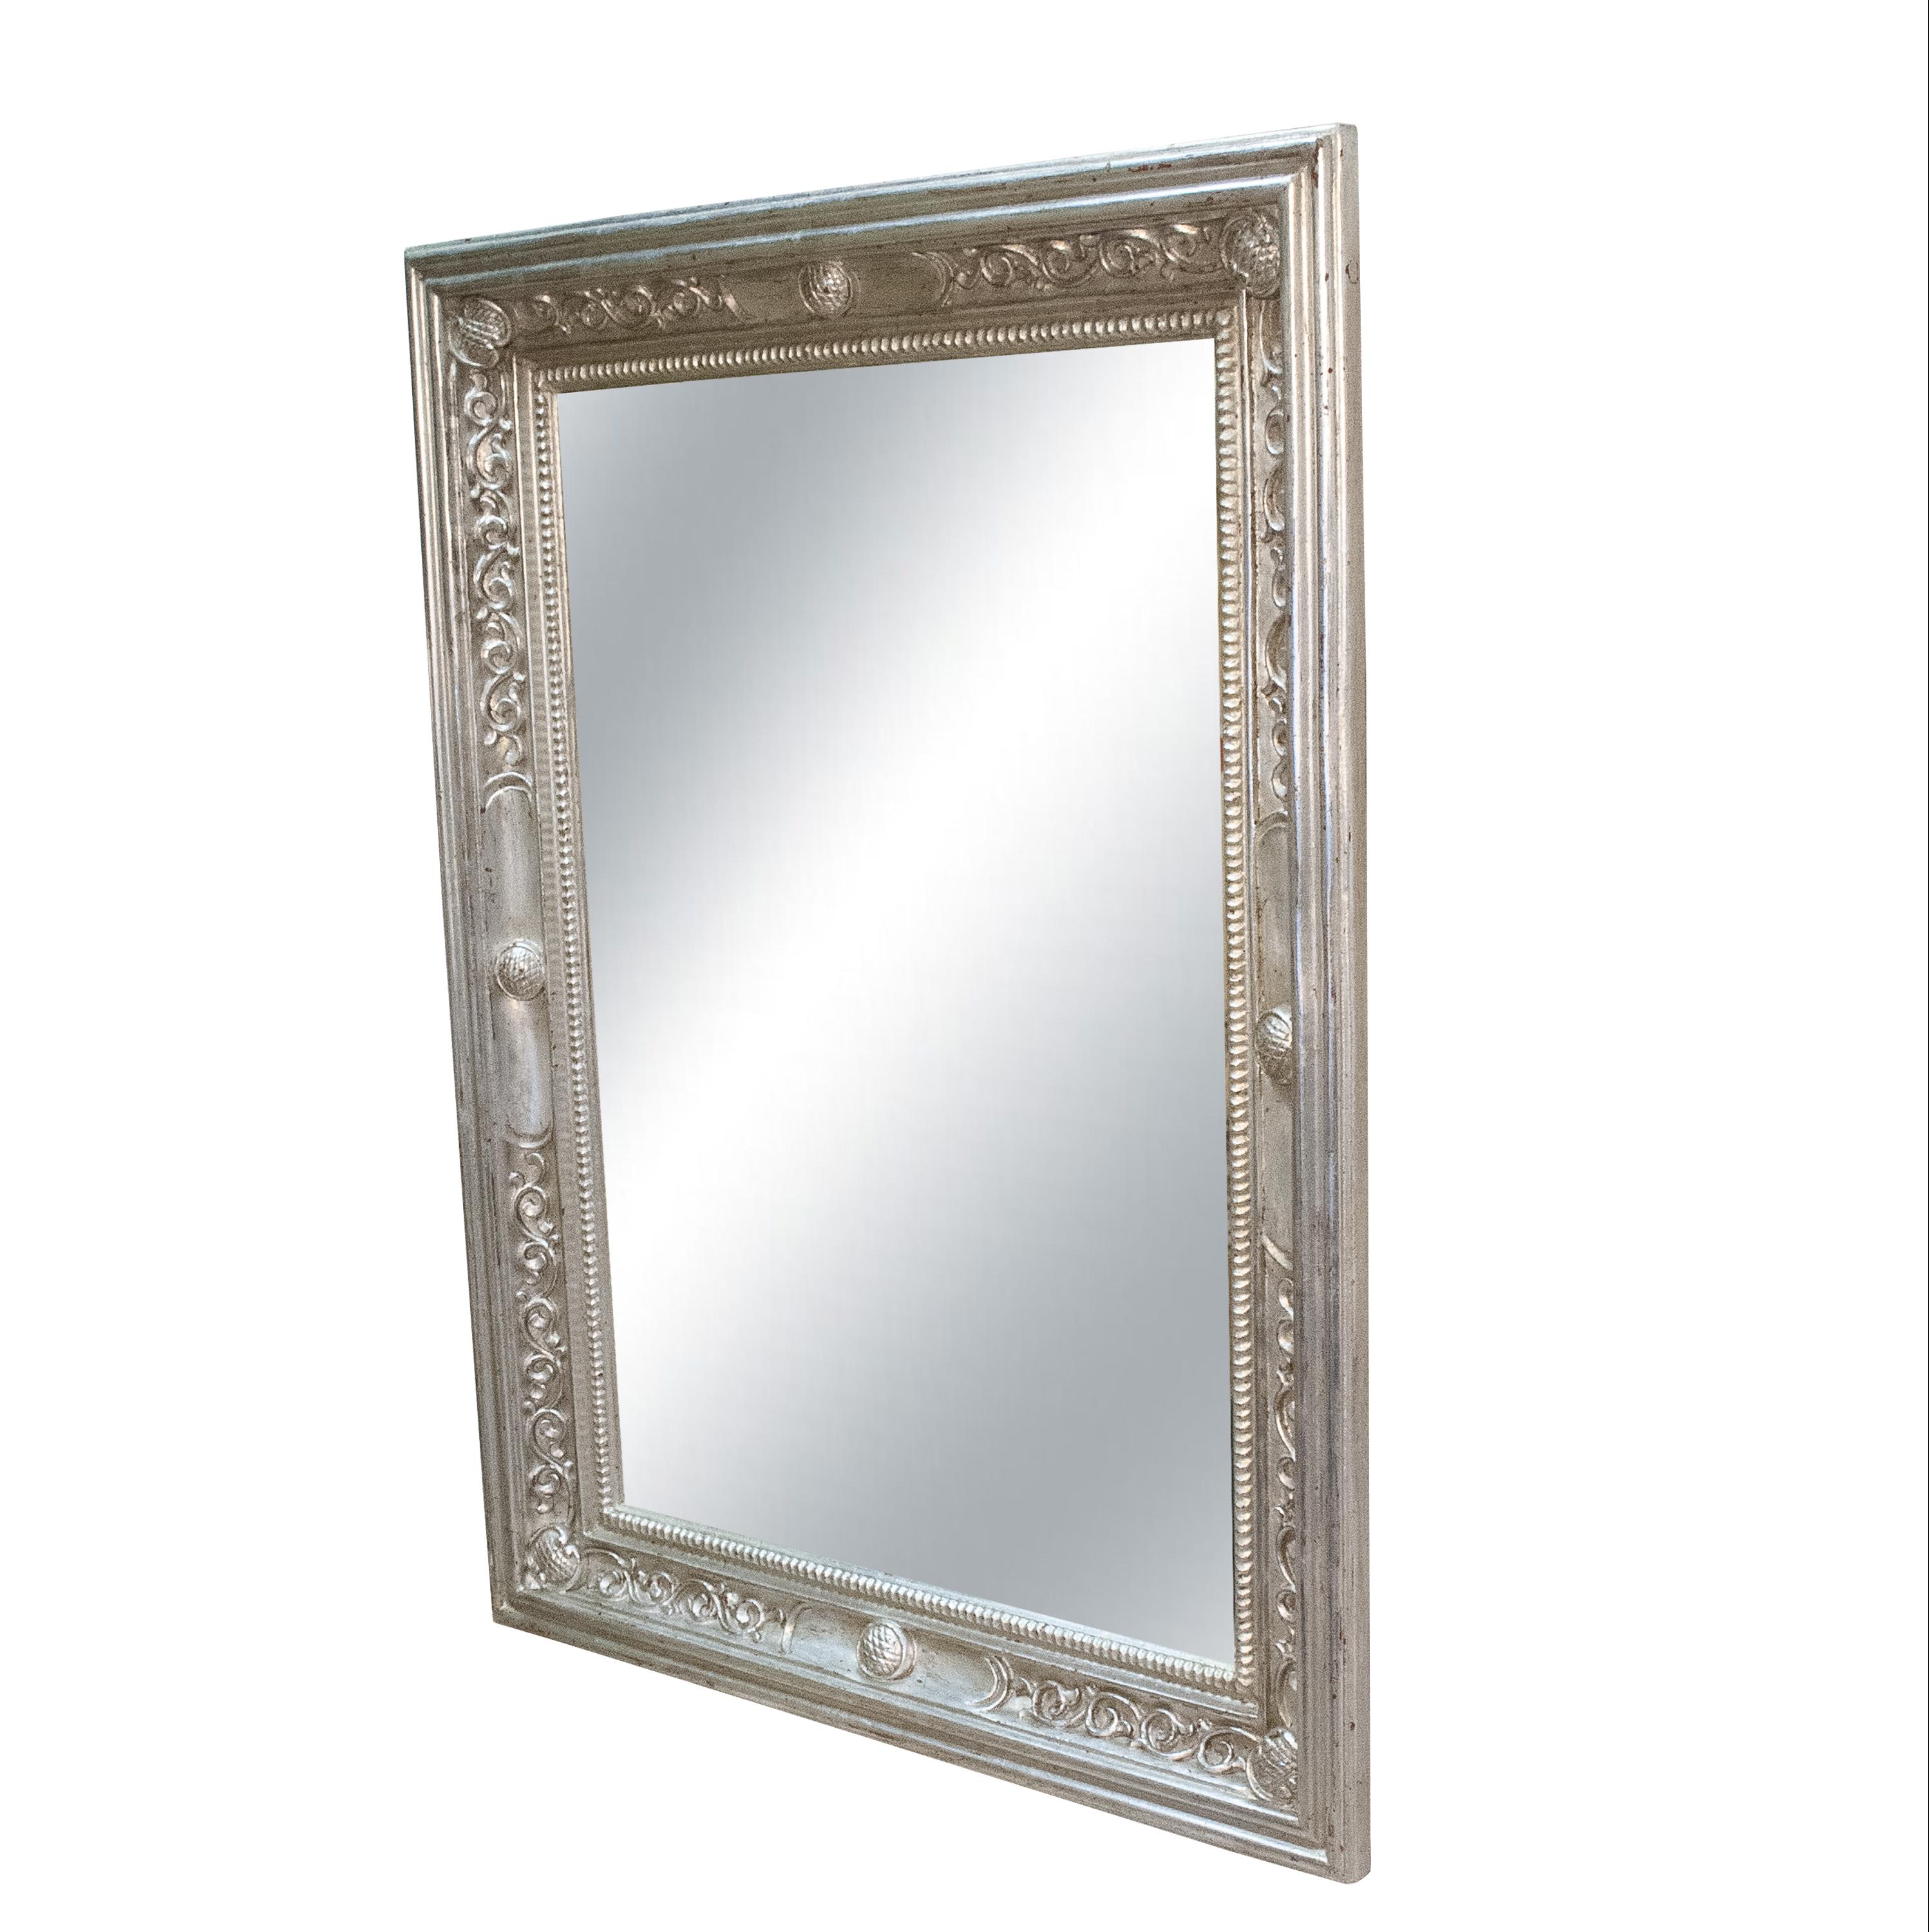 Late 20th Century Neoclassical Regency Rectangular Silver Hand Carved Wooden Mirror For Sale